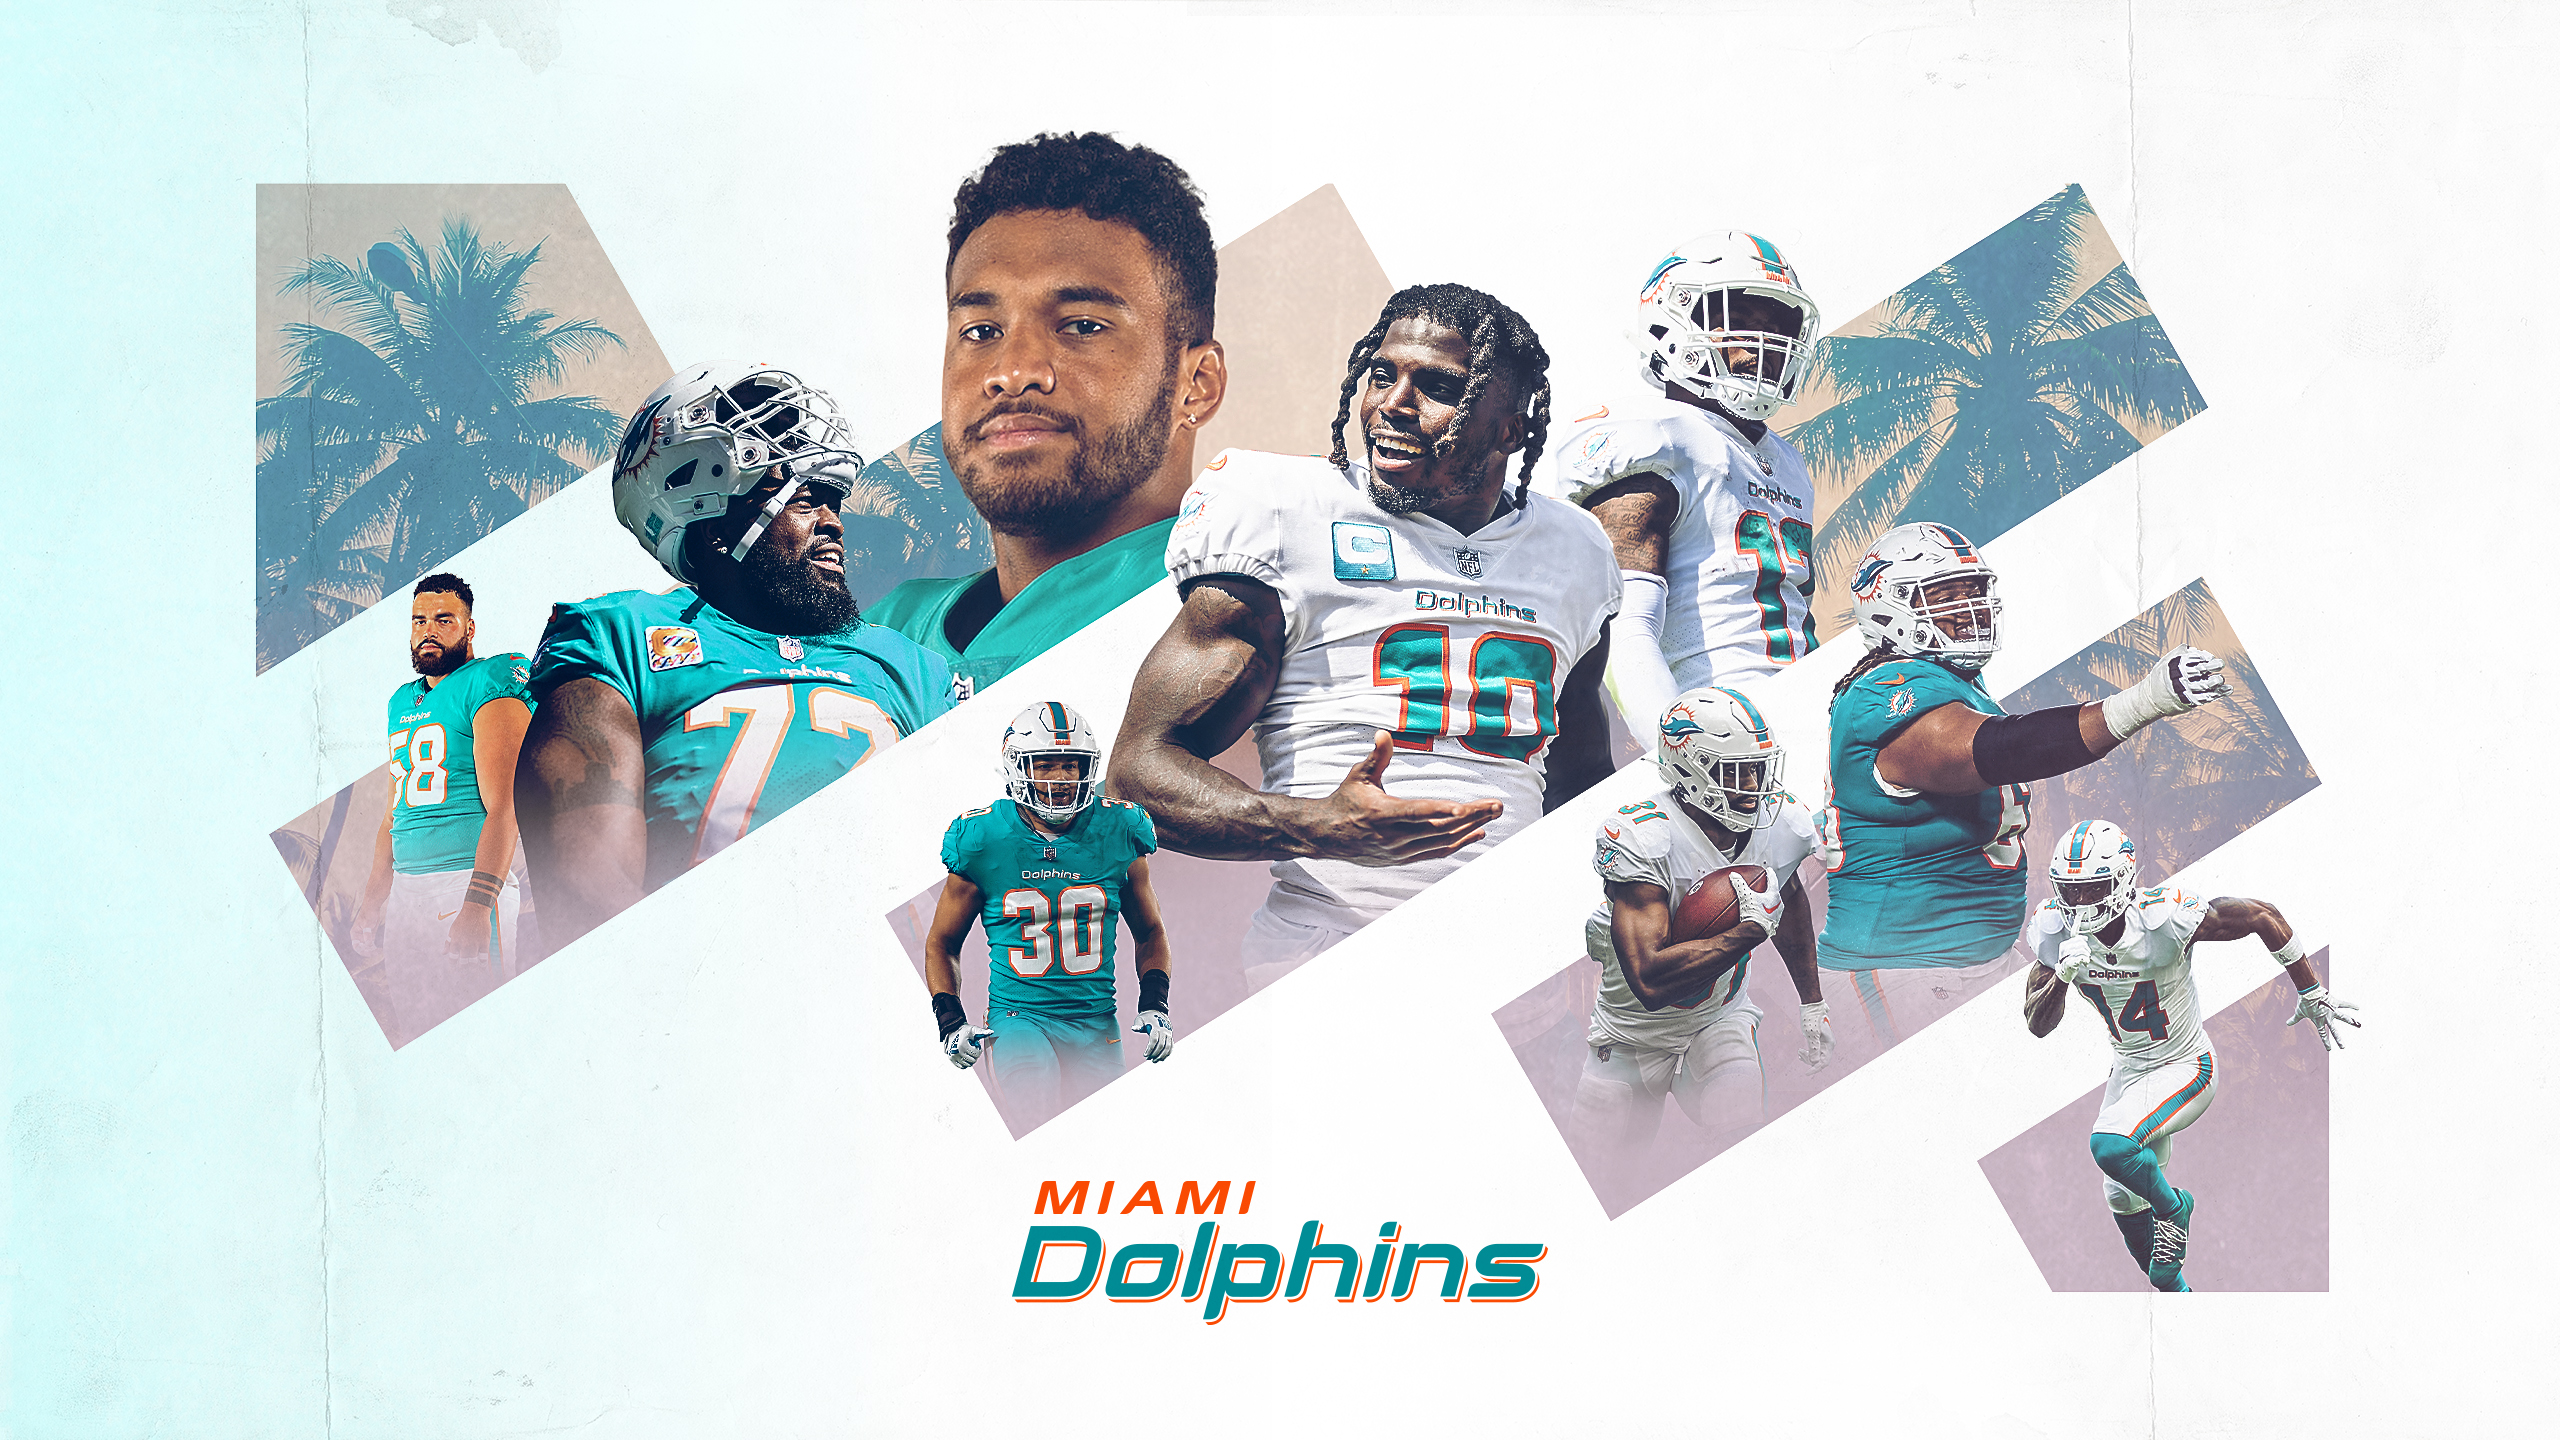 Miami Dolphins Wednesdays, we get new wallpaper